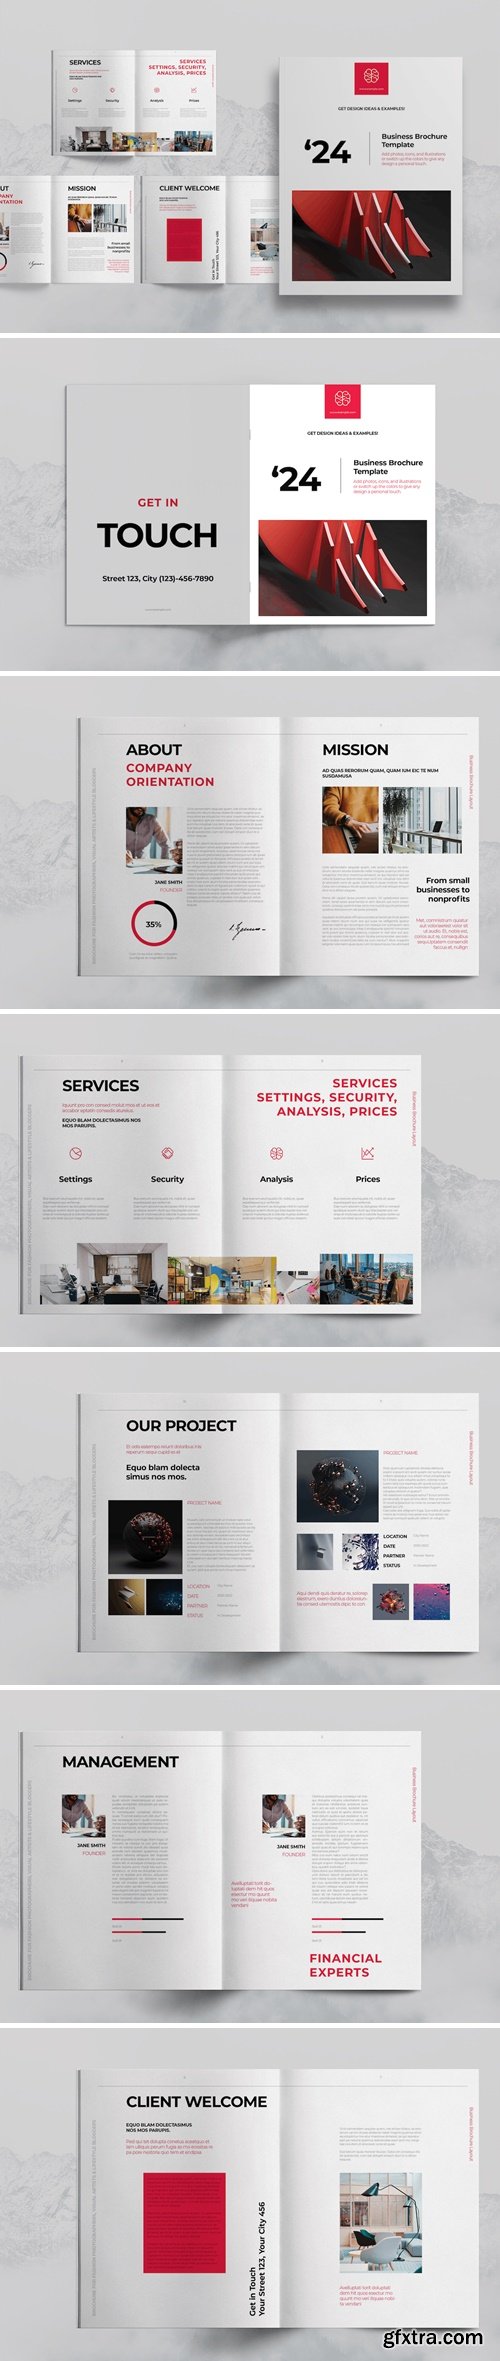 Red Company Brochure Template HQHAADT